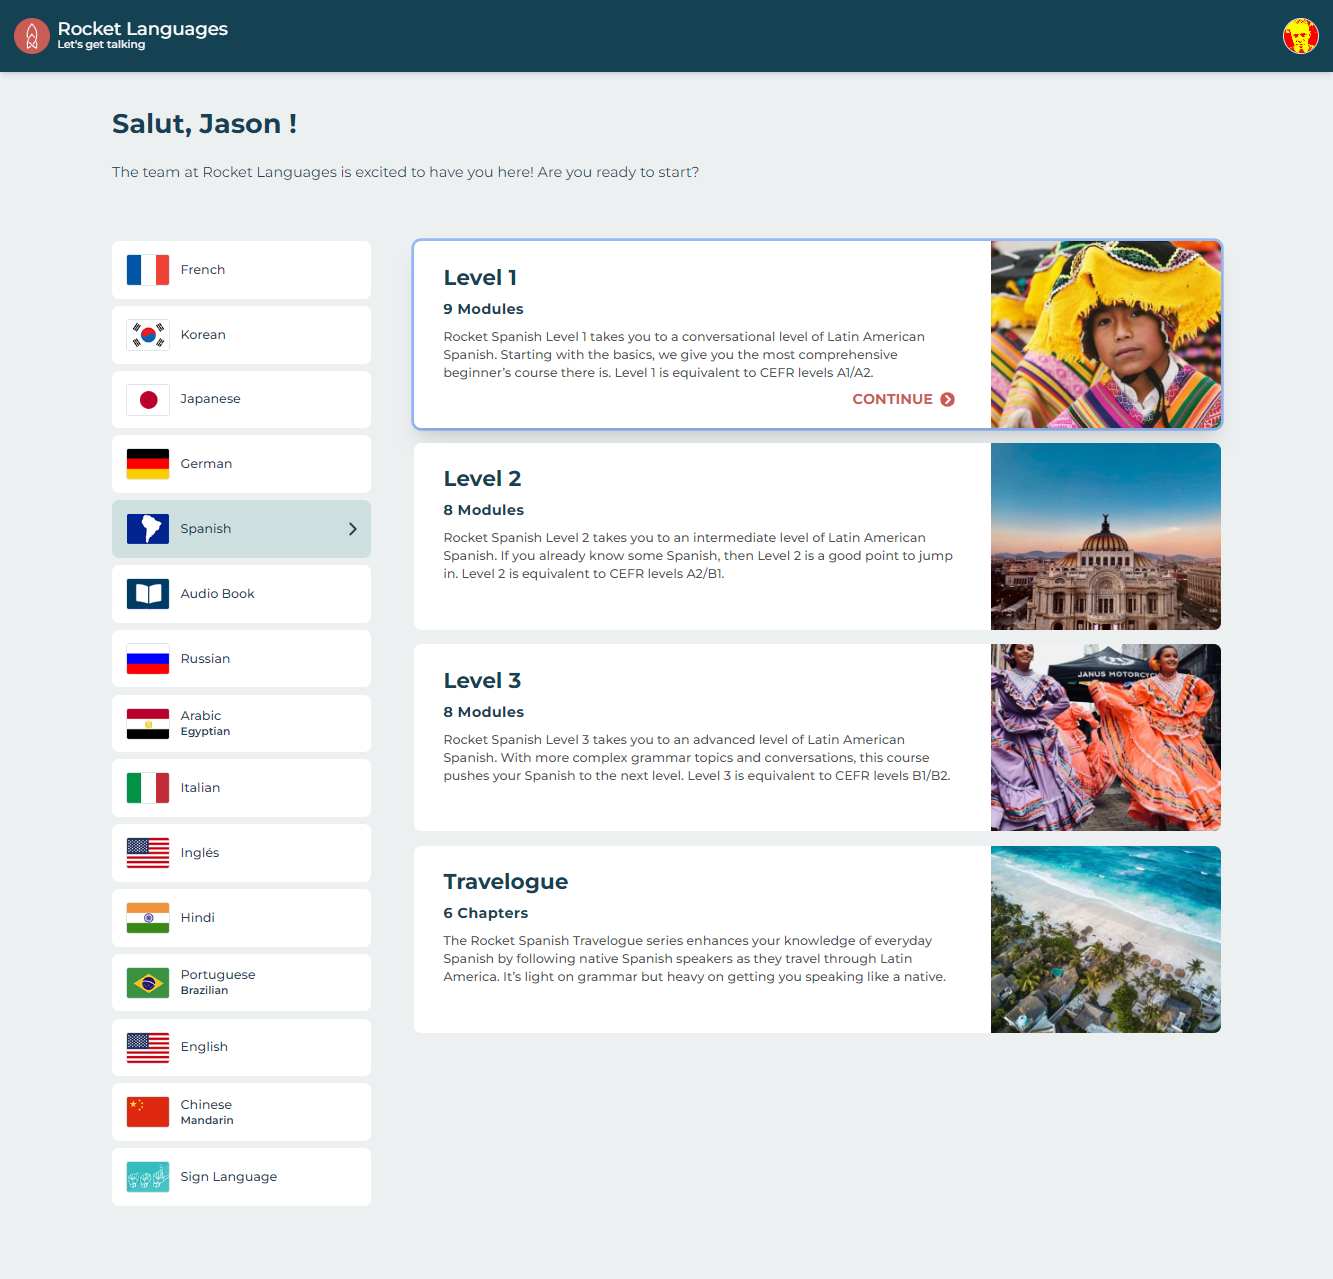 Rocket Languages page showing all languages available for online learning.